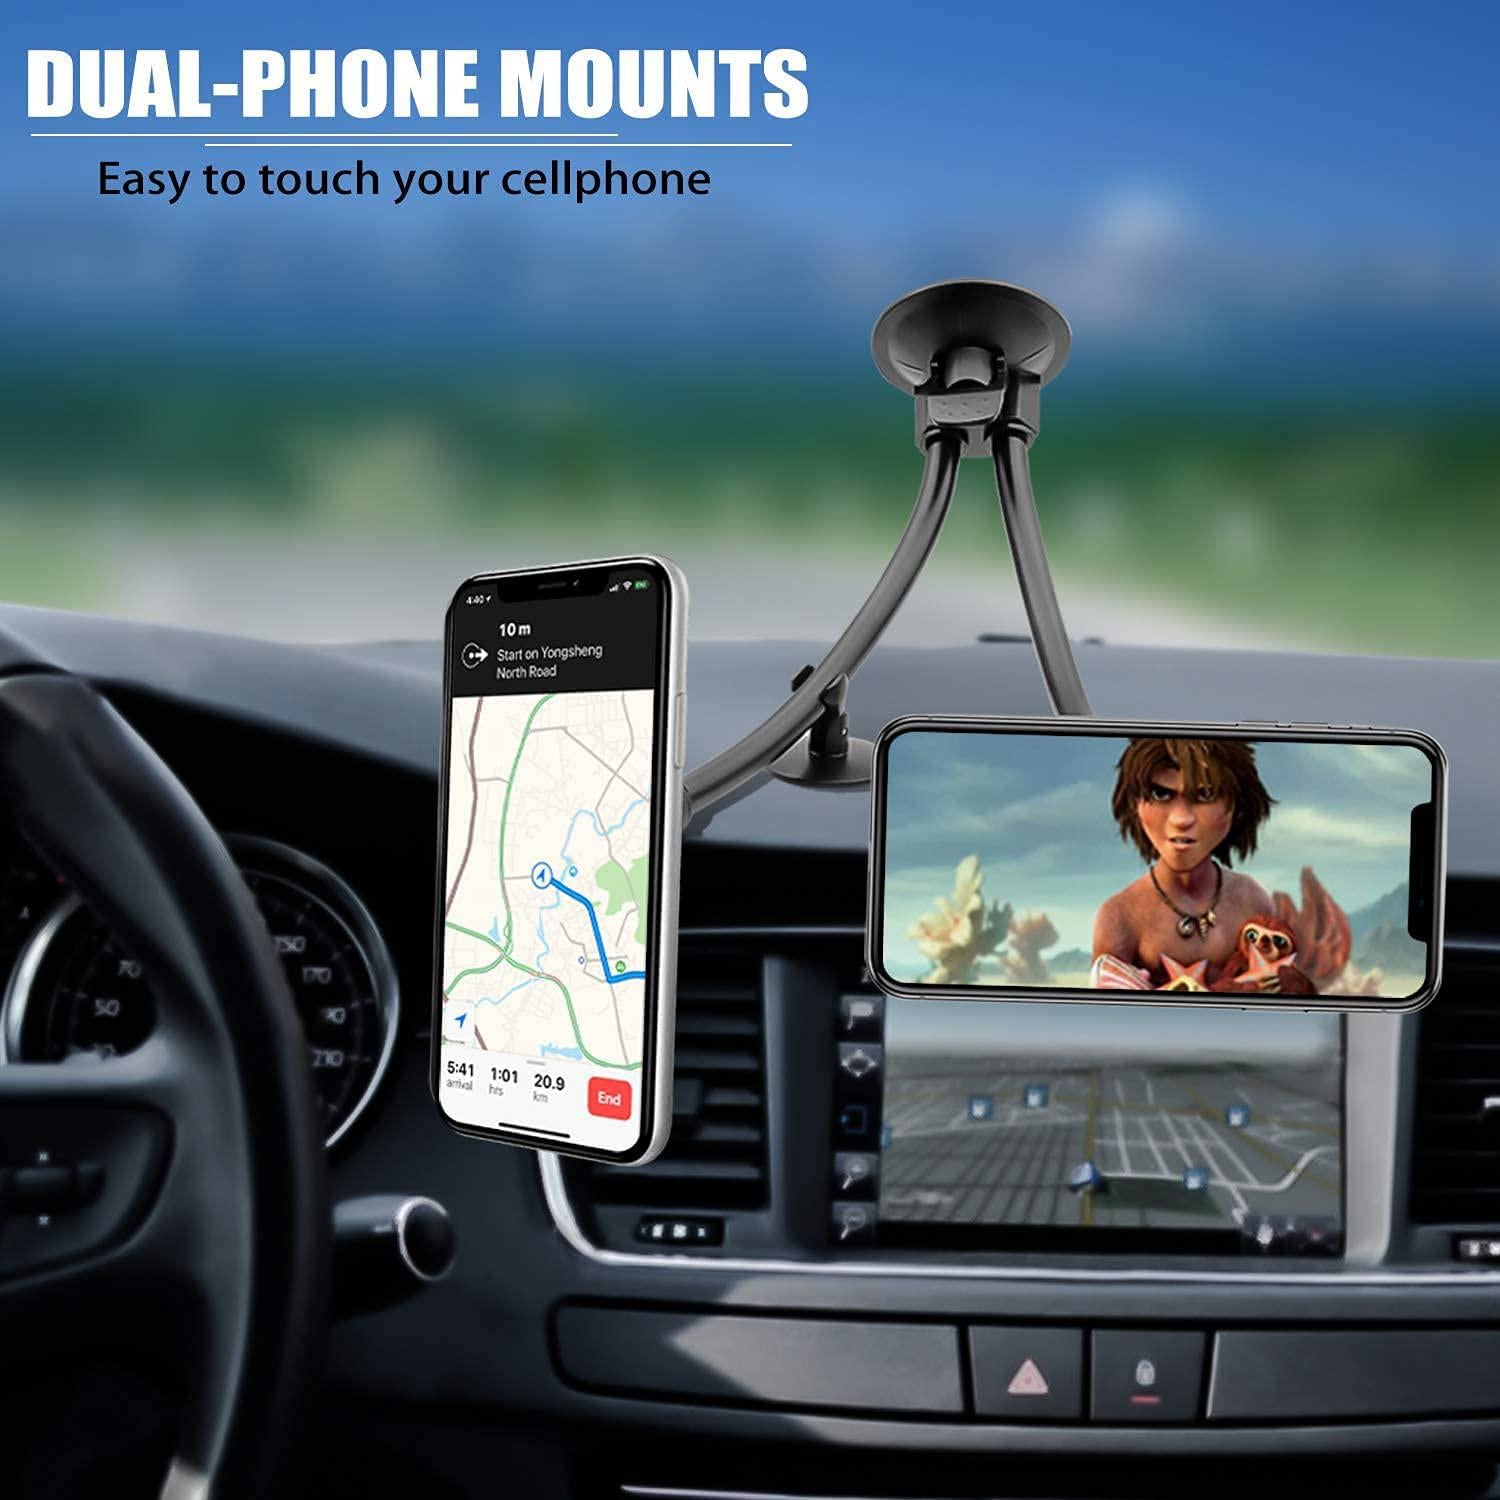 EXSHOW, Dual Magnetic Car Phone Mount, EXSHOW Gooseneck Car Phone Holder for Truck Windshield and Dashboard with 3M/Stabilizer, Dual Long Arm Phone Mount Compatible with iPhone Galaxy All Smart Cell Phones